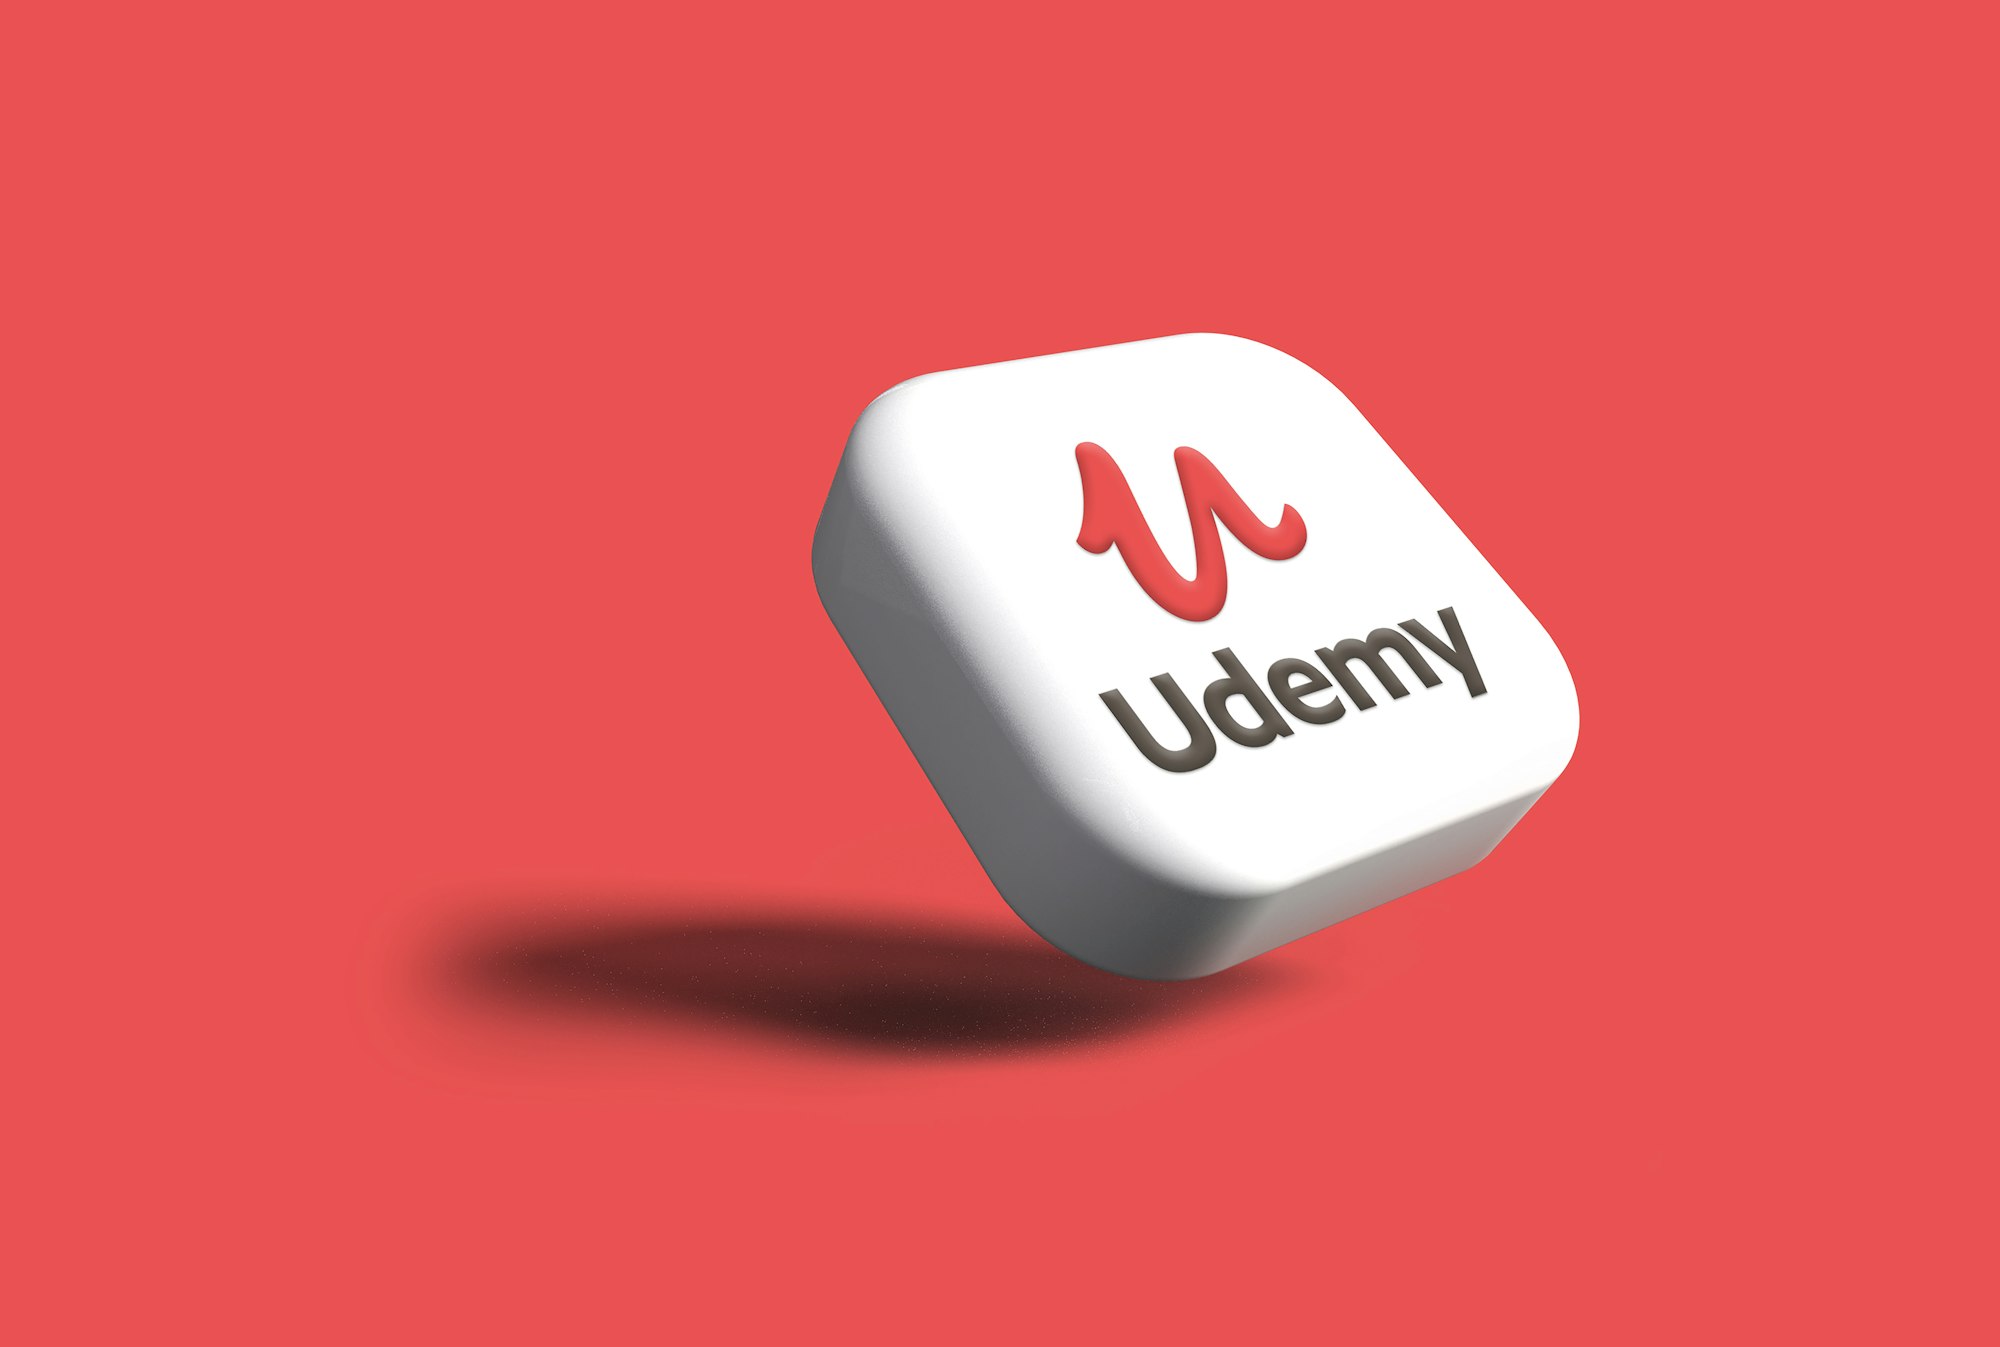 Udemy icon in 3D. My 3D work may be seen in the section titled "3D Render."